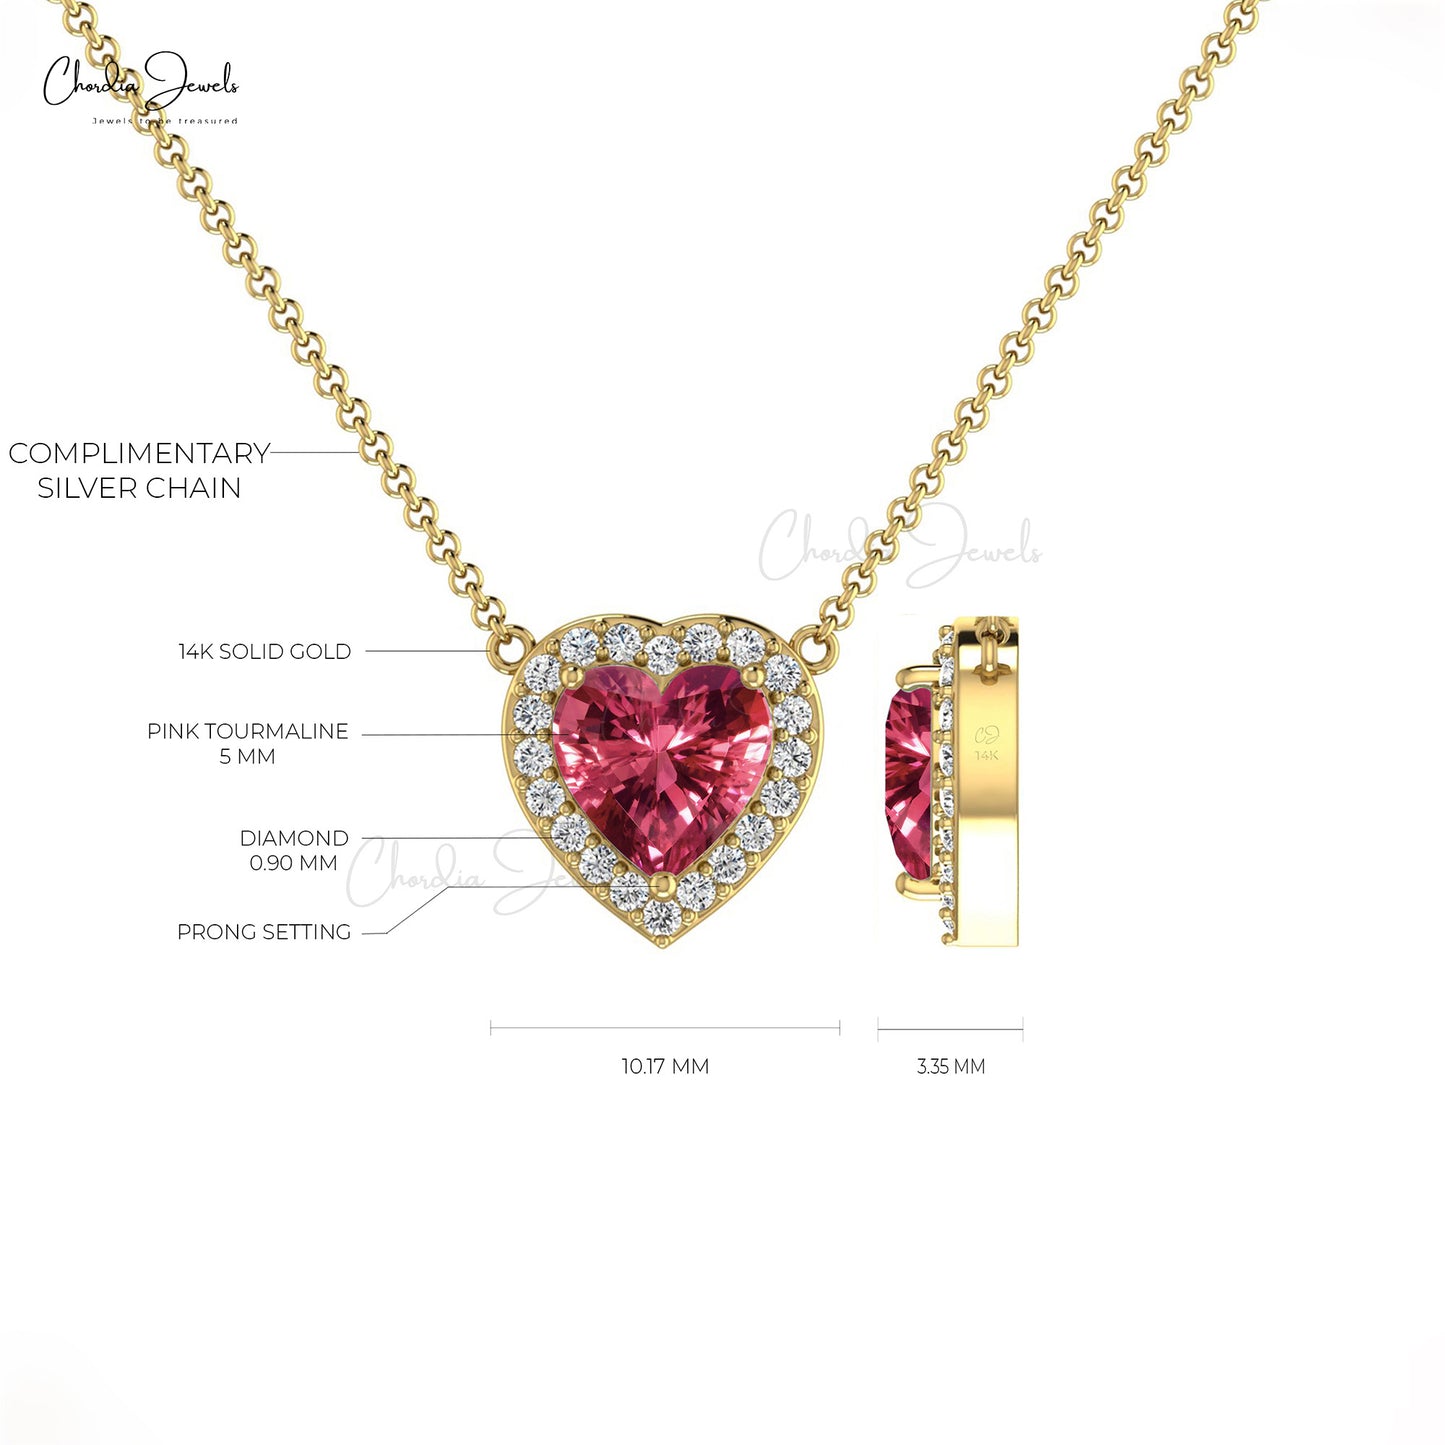 October Birthstone Jewelry 14K Solid White Gold Pink Tourmaline & Diamond Halo Heart Necklace